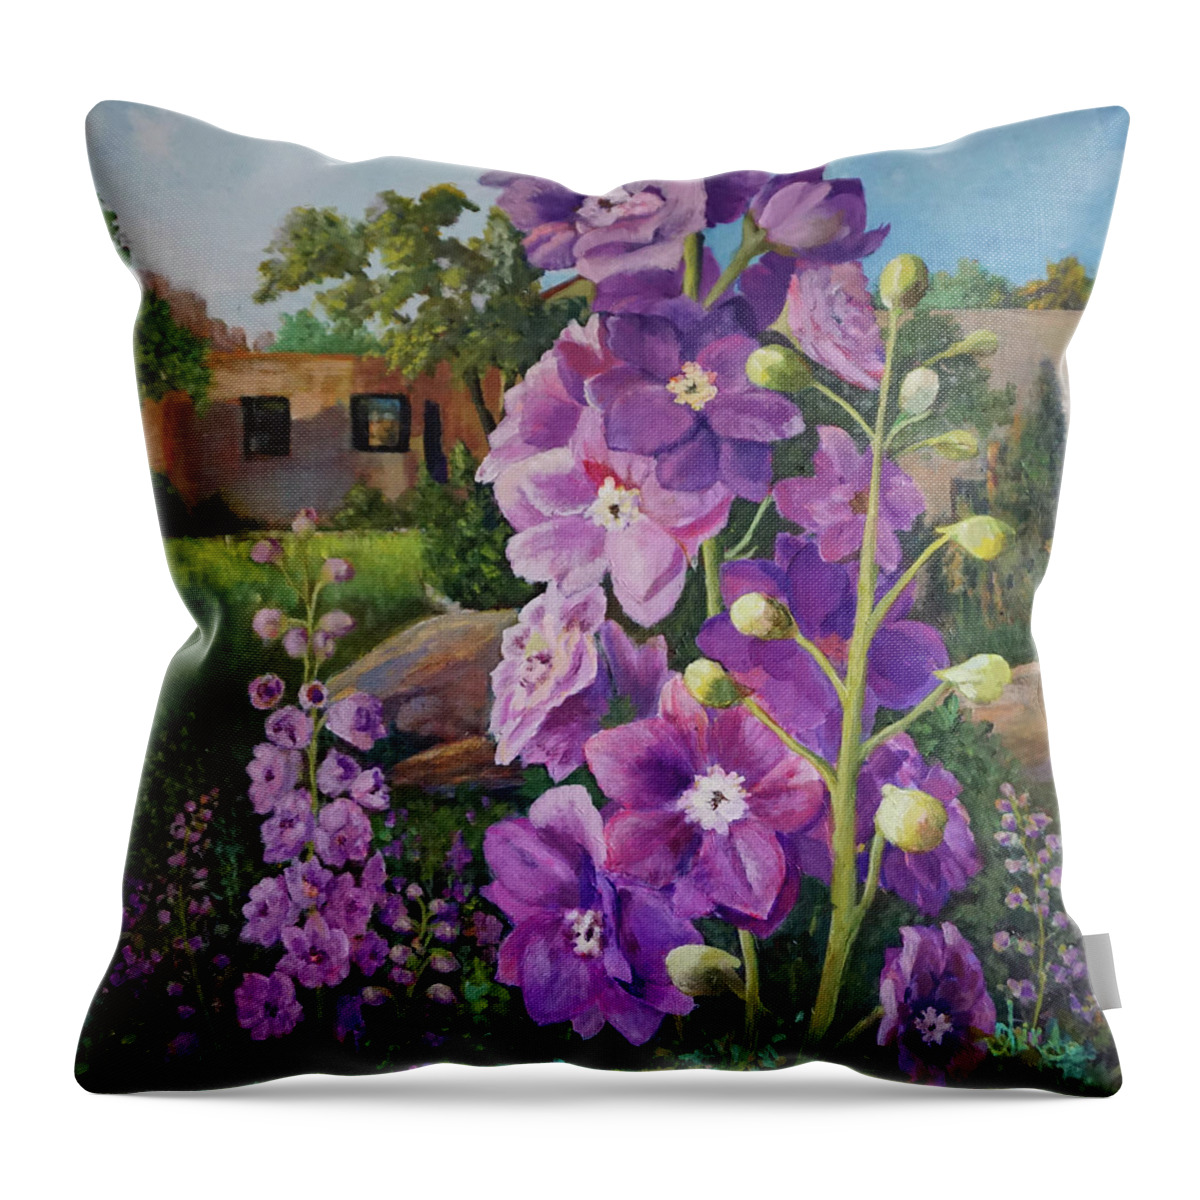 Pink Throw Pillow featuring the painting Delightful Delphiniums by Alika Kumar